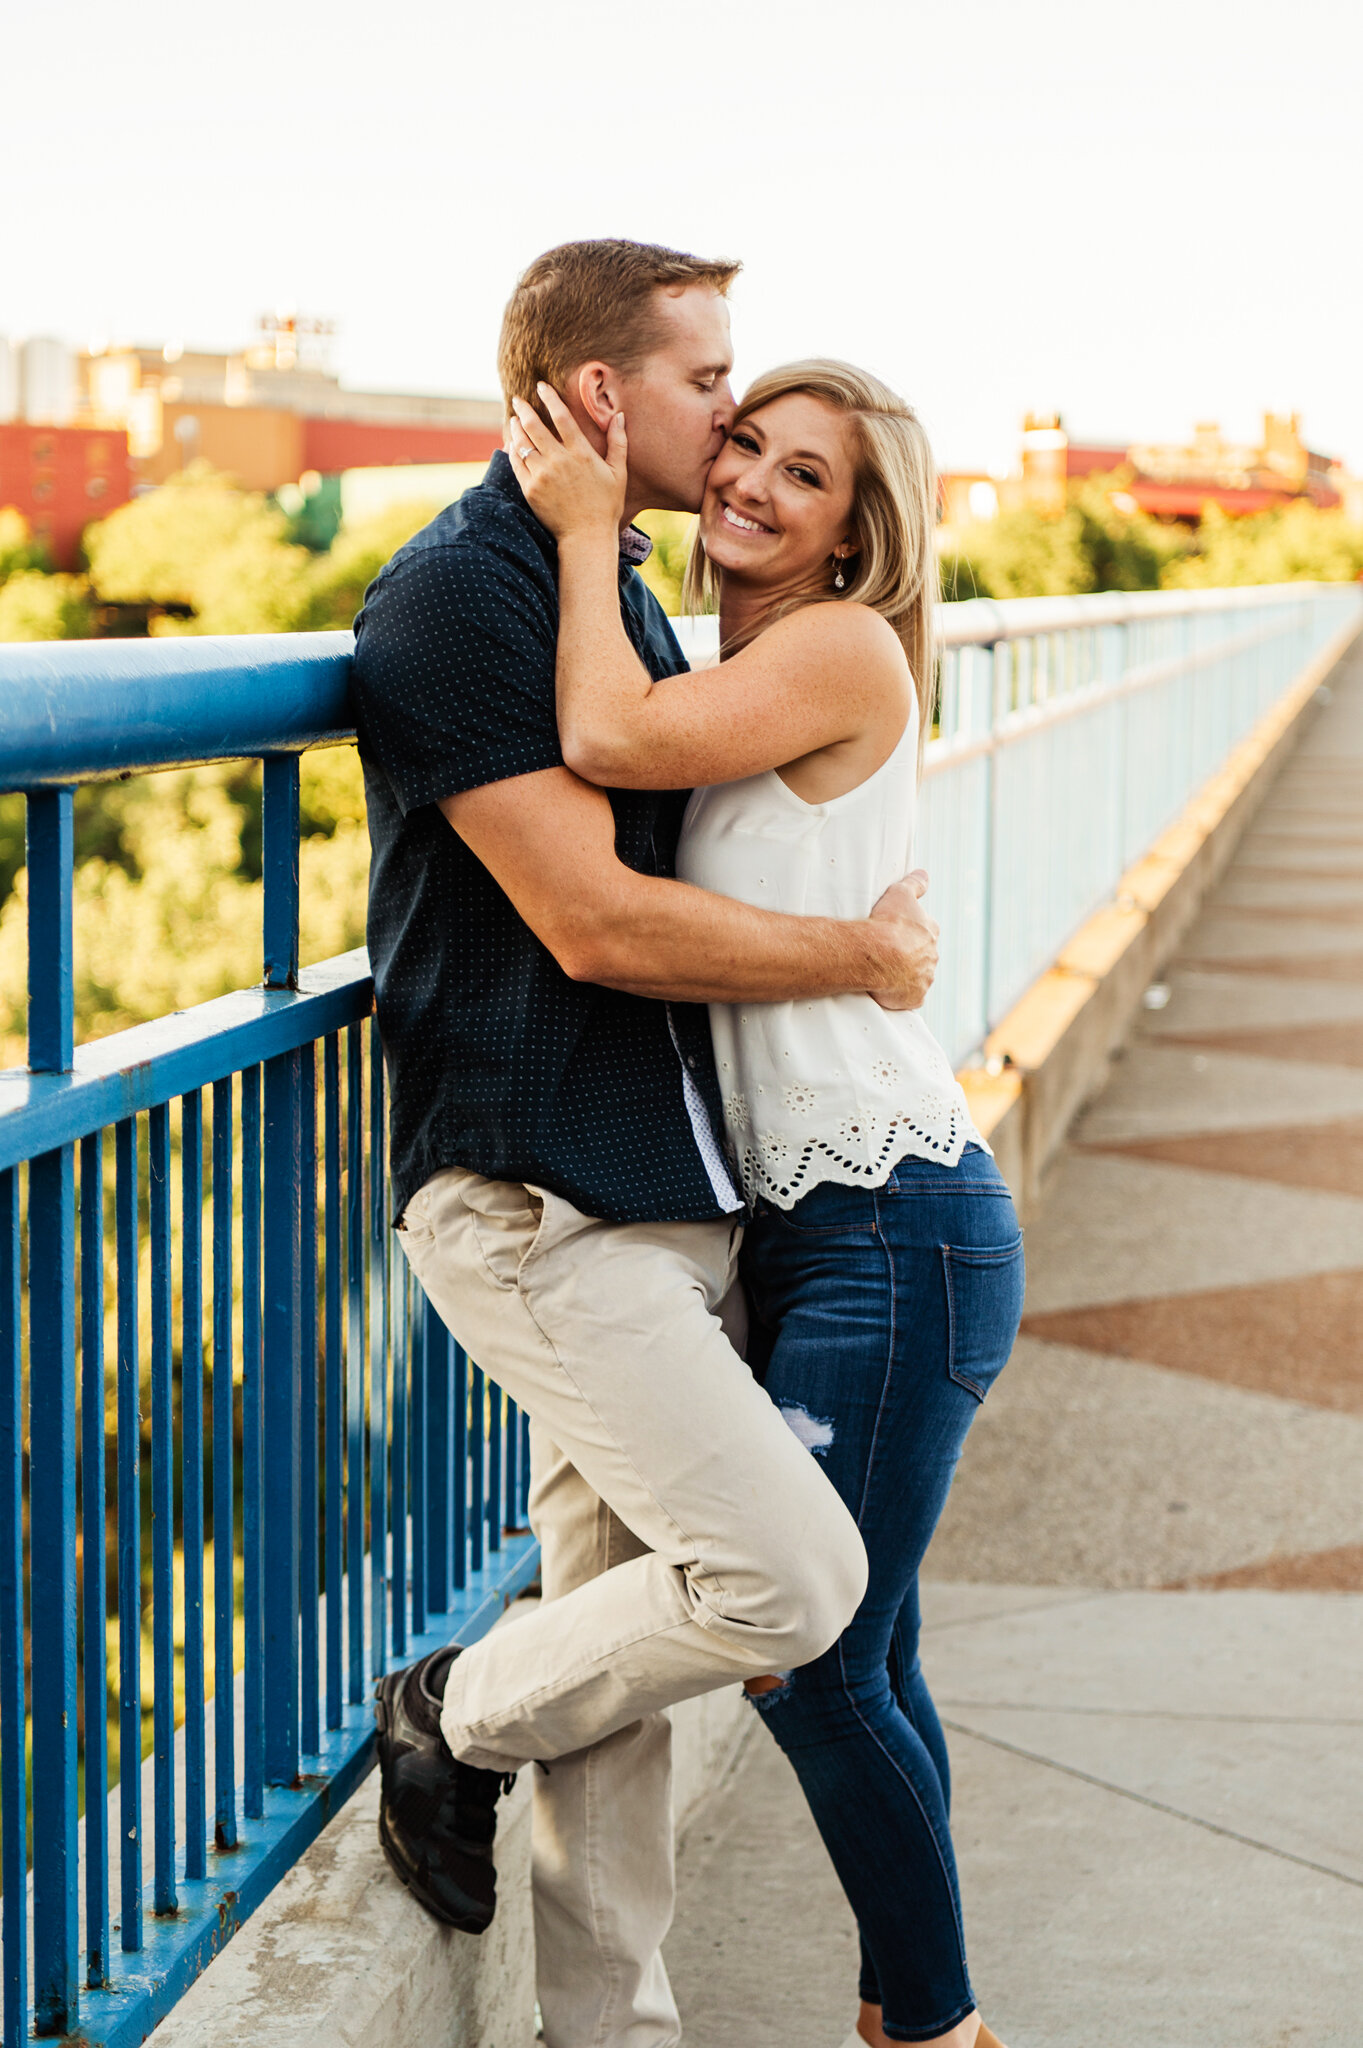 Genesee_Brew_House_High_Falls_Rochester_Engagement_Session_JILL_STUDIO_Rochester_NY_Photographer_5644.jpg